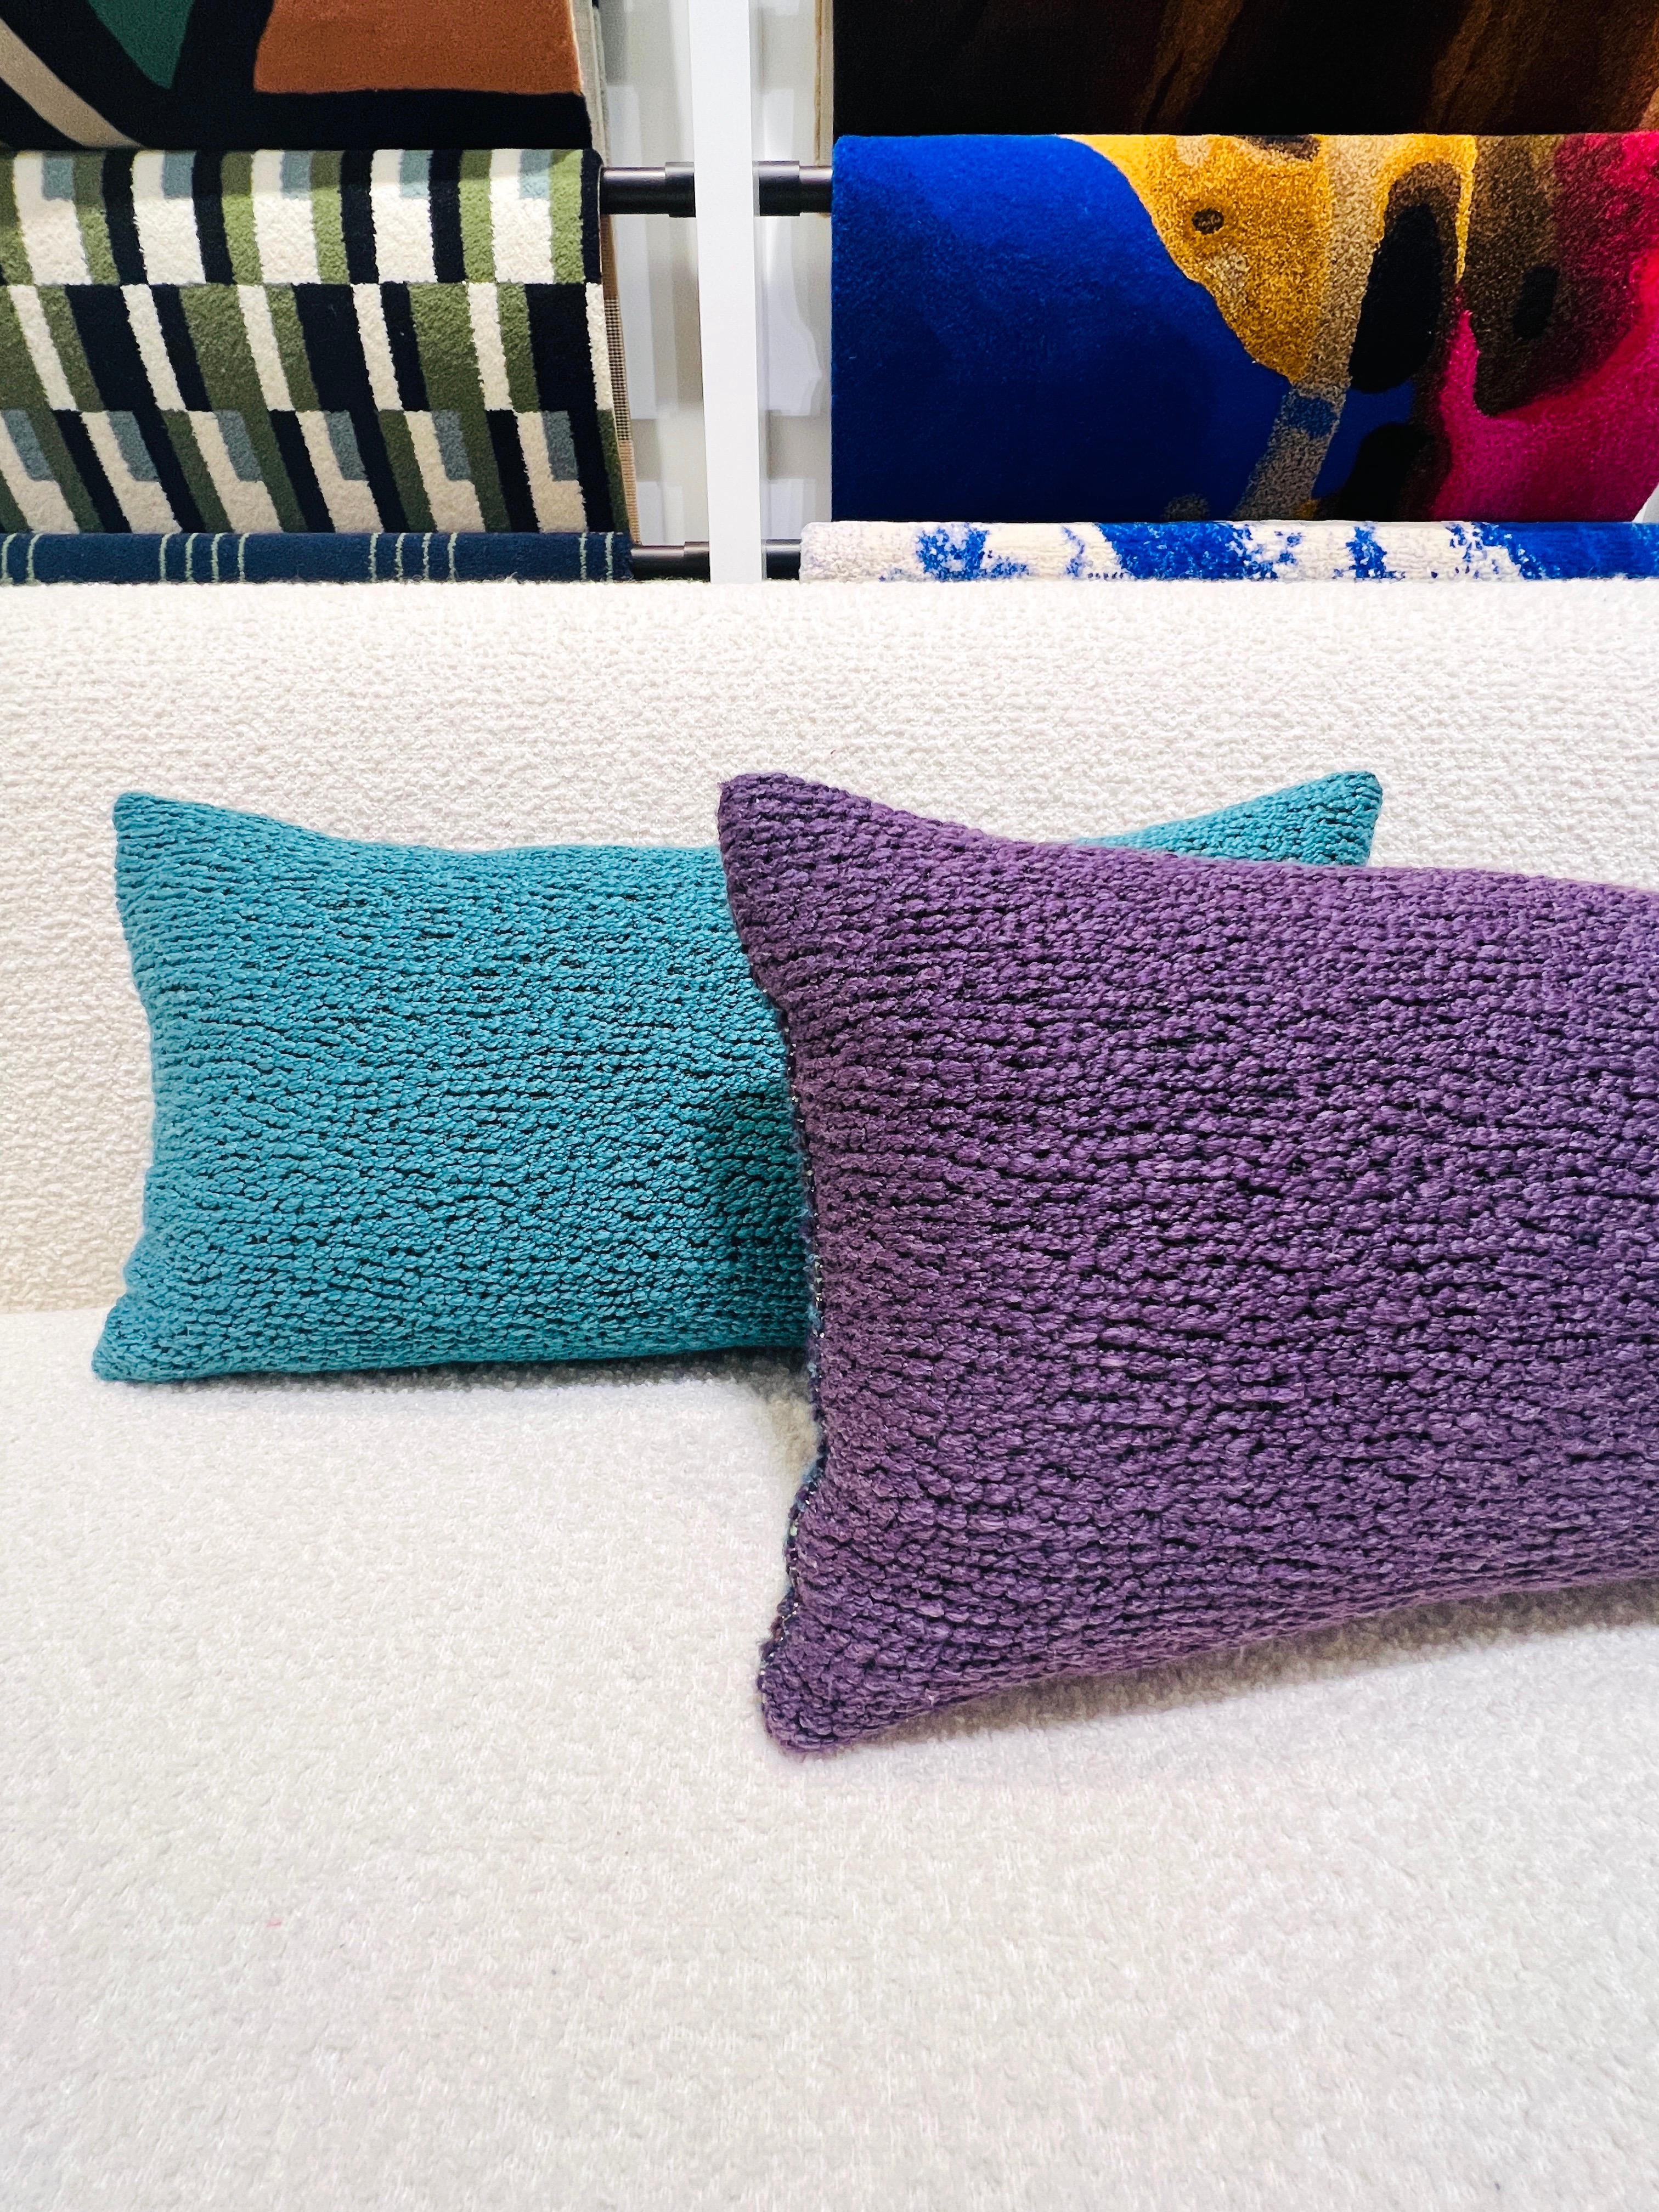 Rustic Pierre Frey Woven Textured and Boucle Lumbar Pillows in Purple and Aqua For Sale